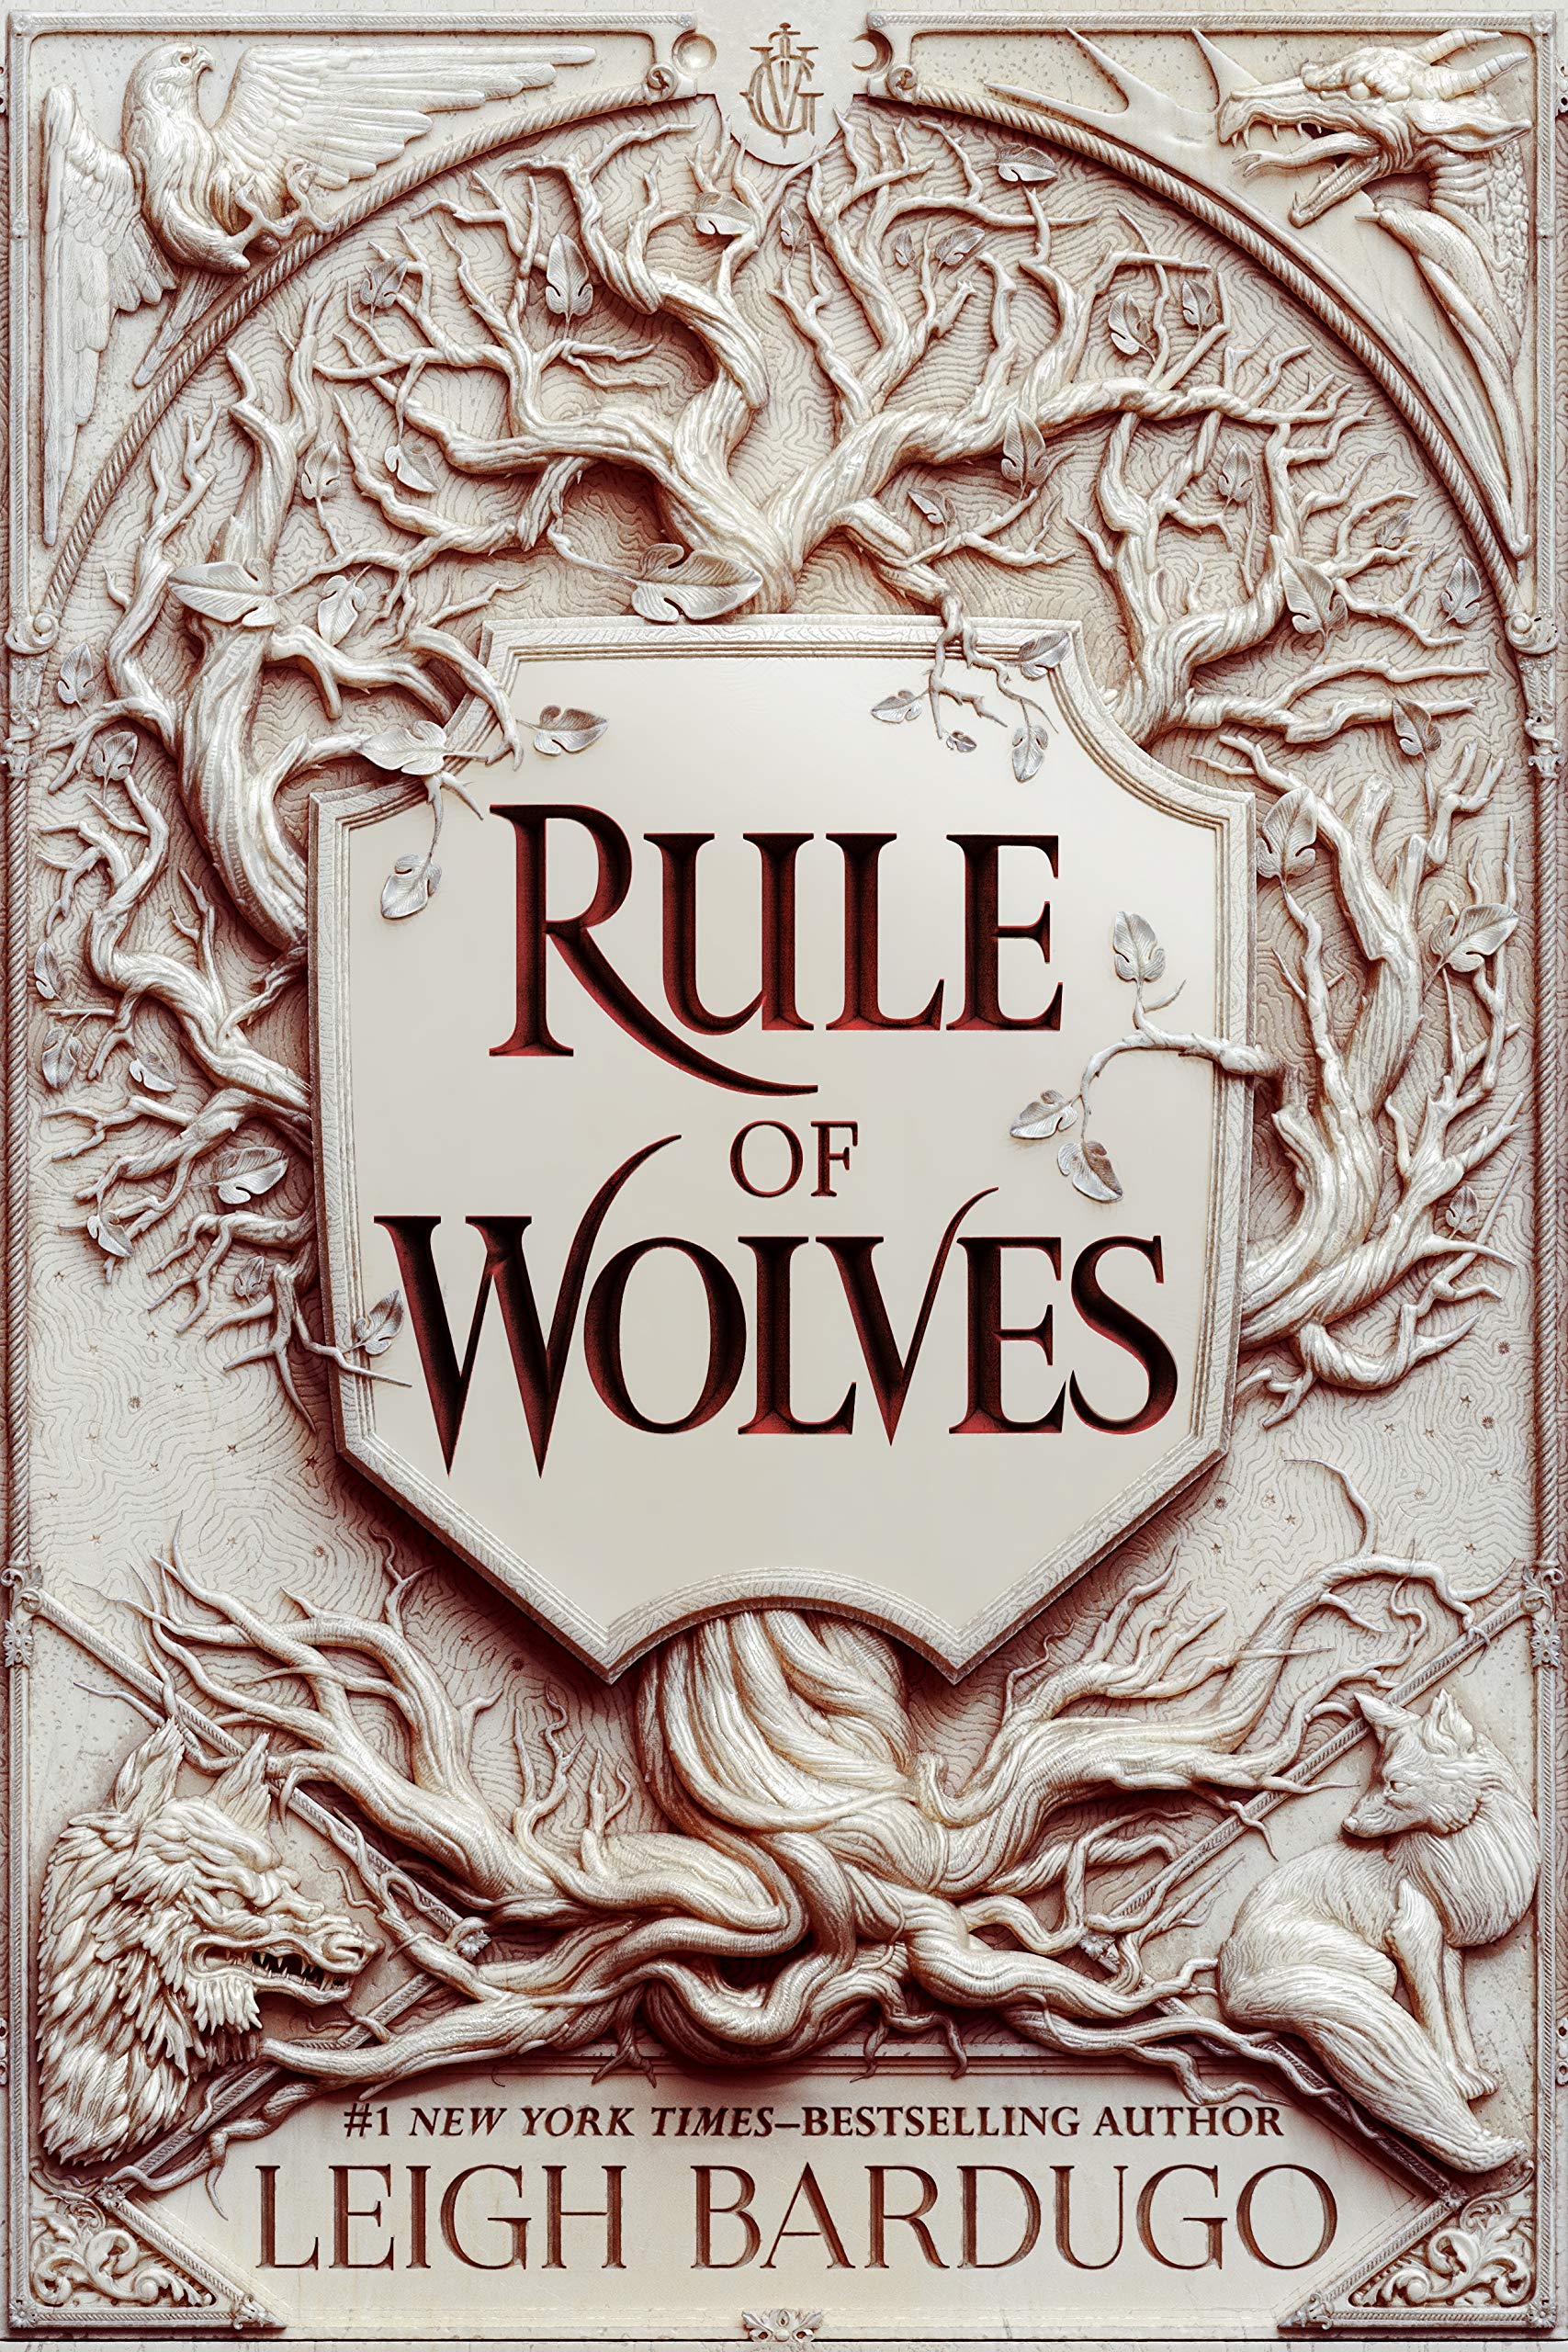 image for "rule of wolves"